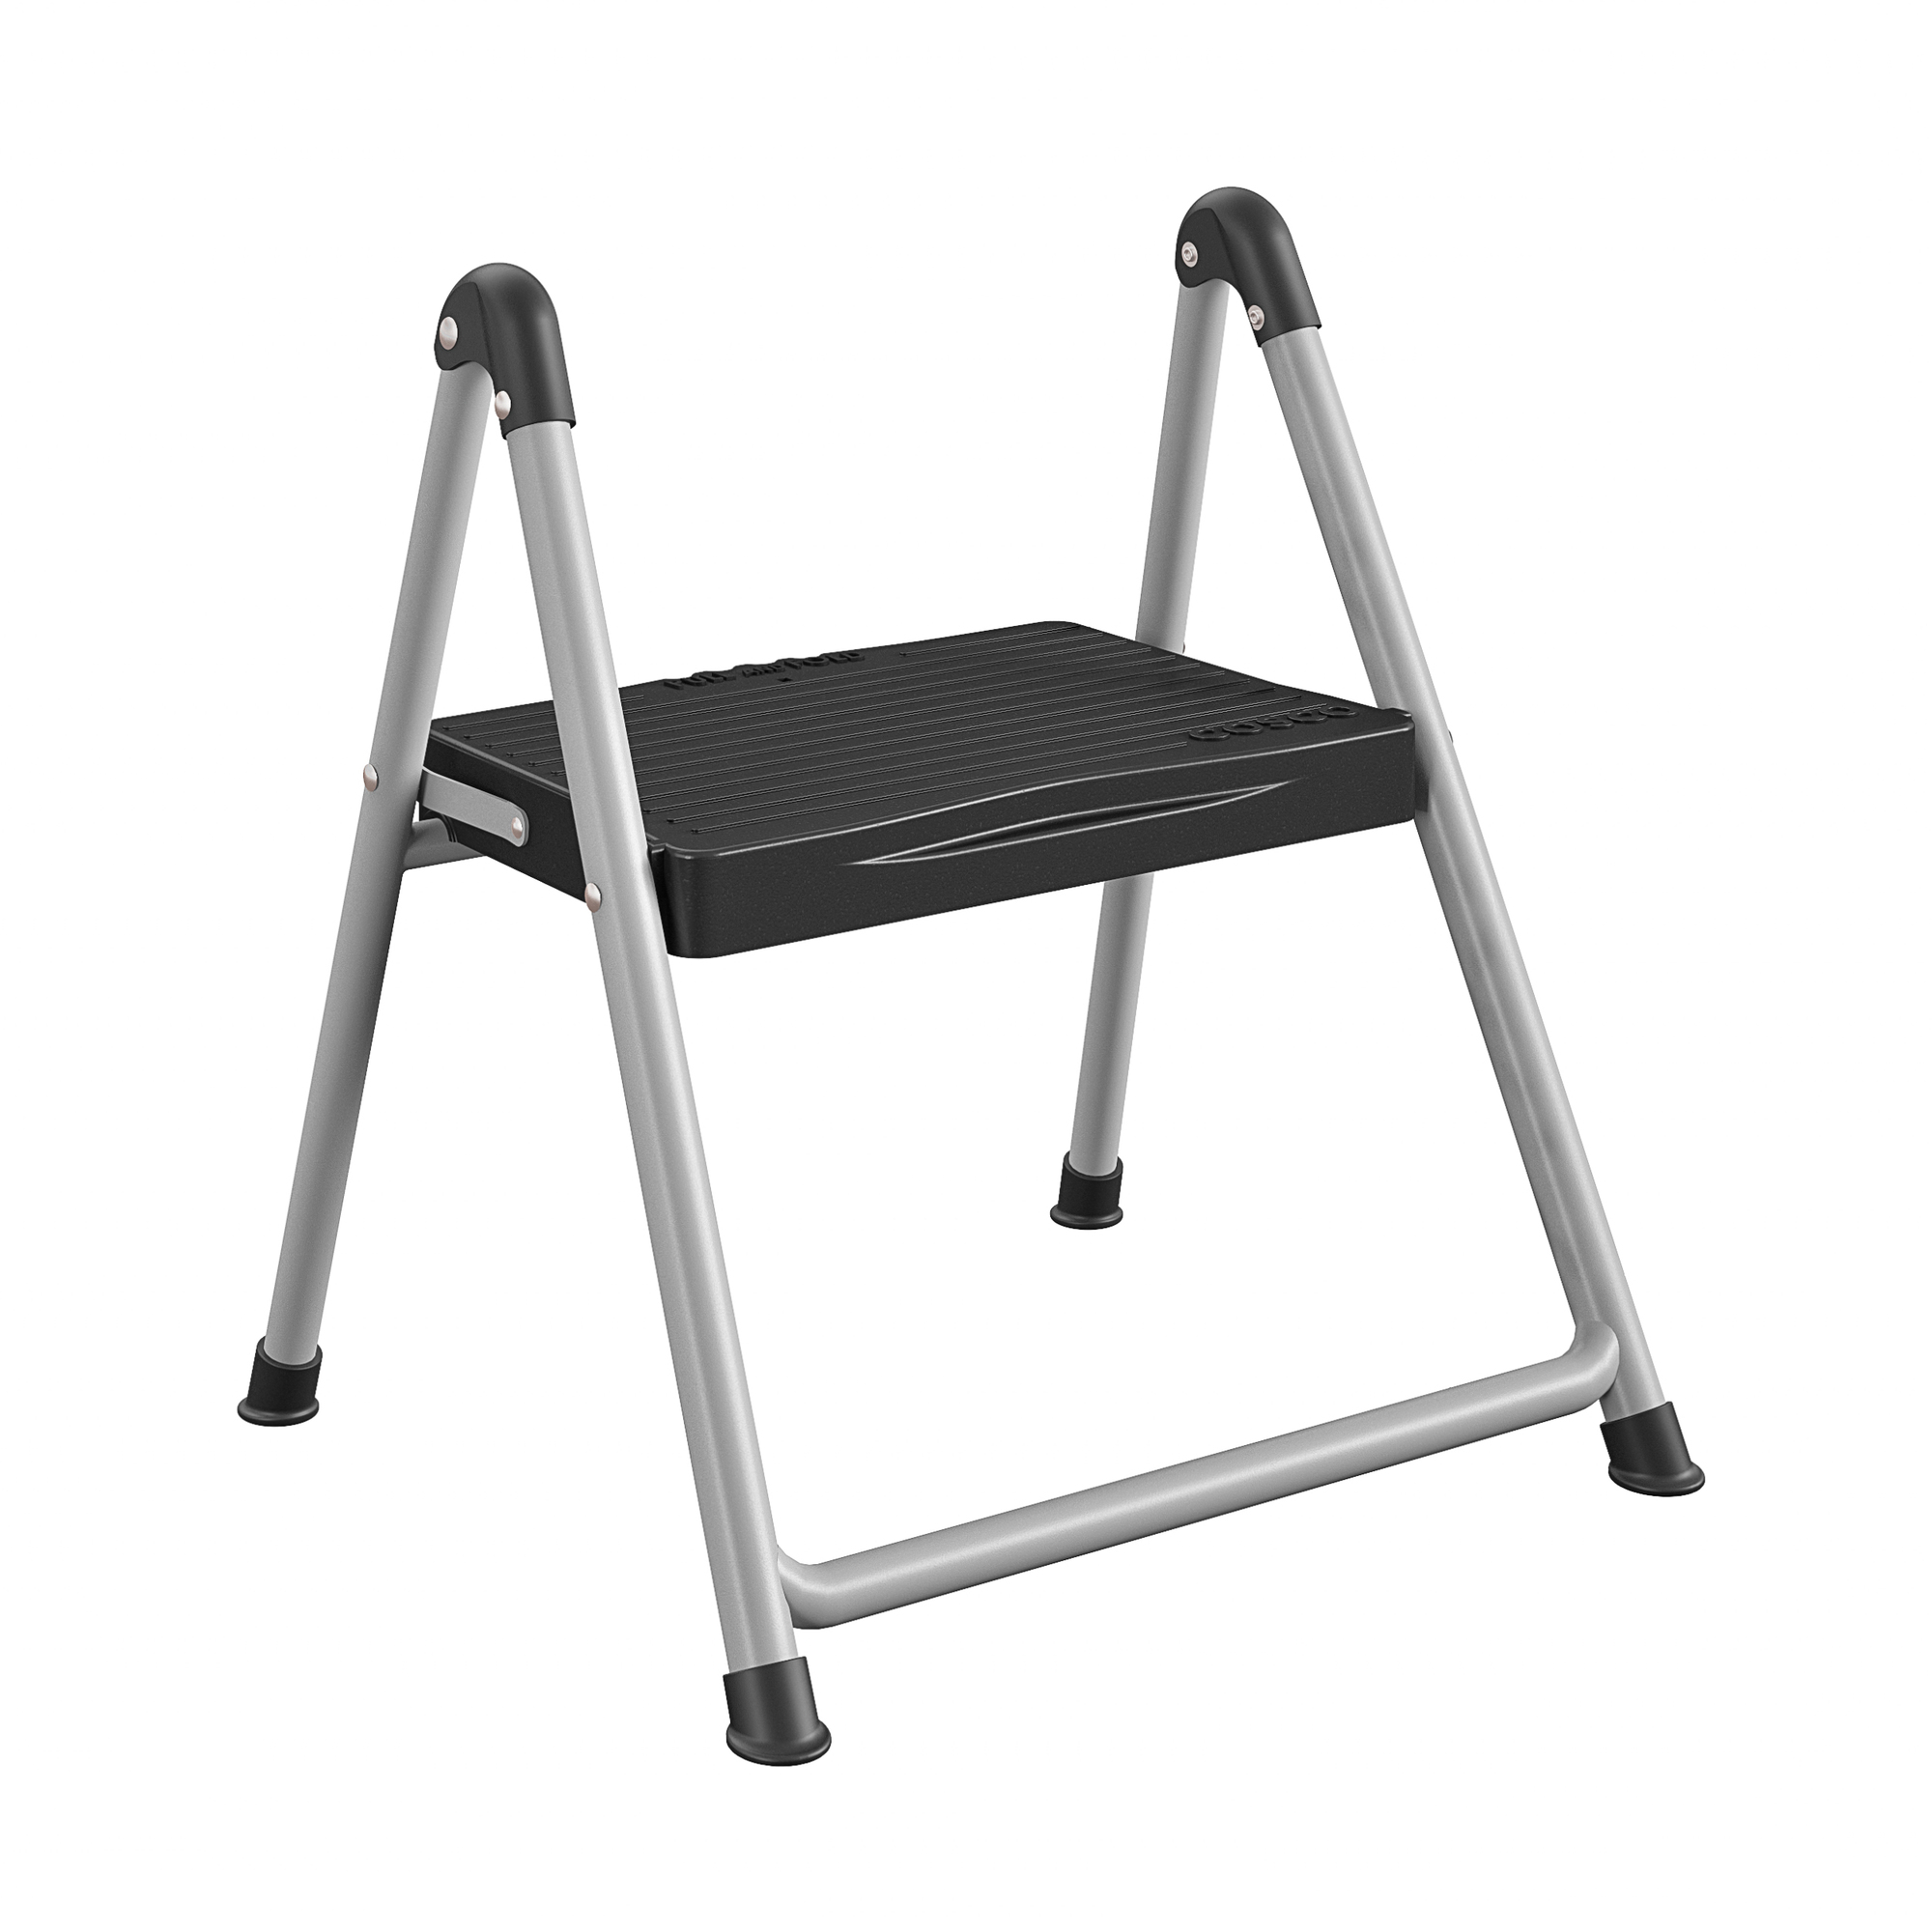 Cosco, One-Step Steel Step Stool without Handle, Height 1.43 ft, Capacity 200 lb, Material Steel, Model 11014PBL1E